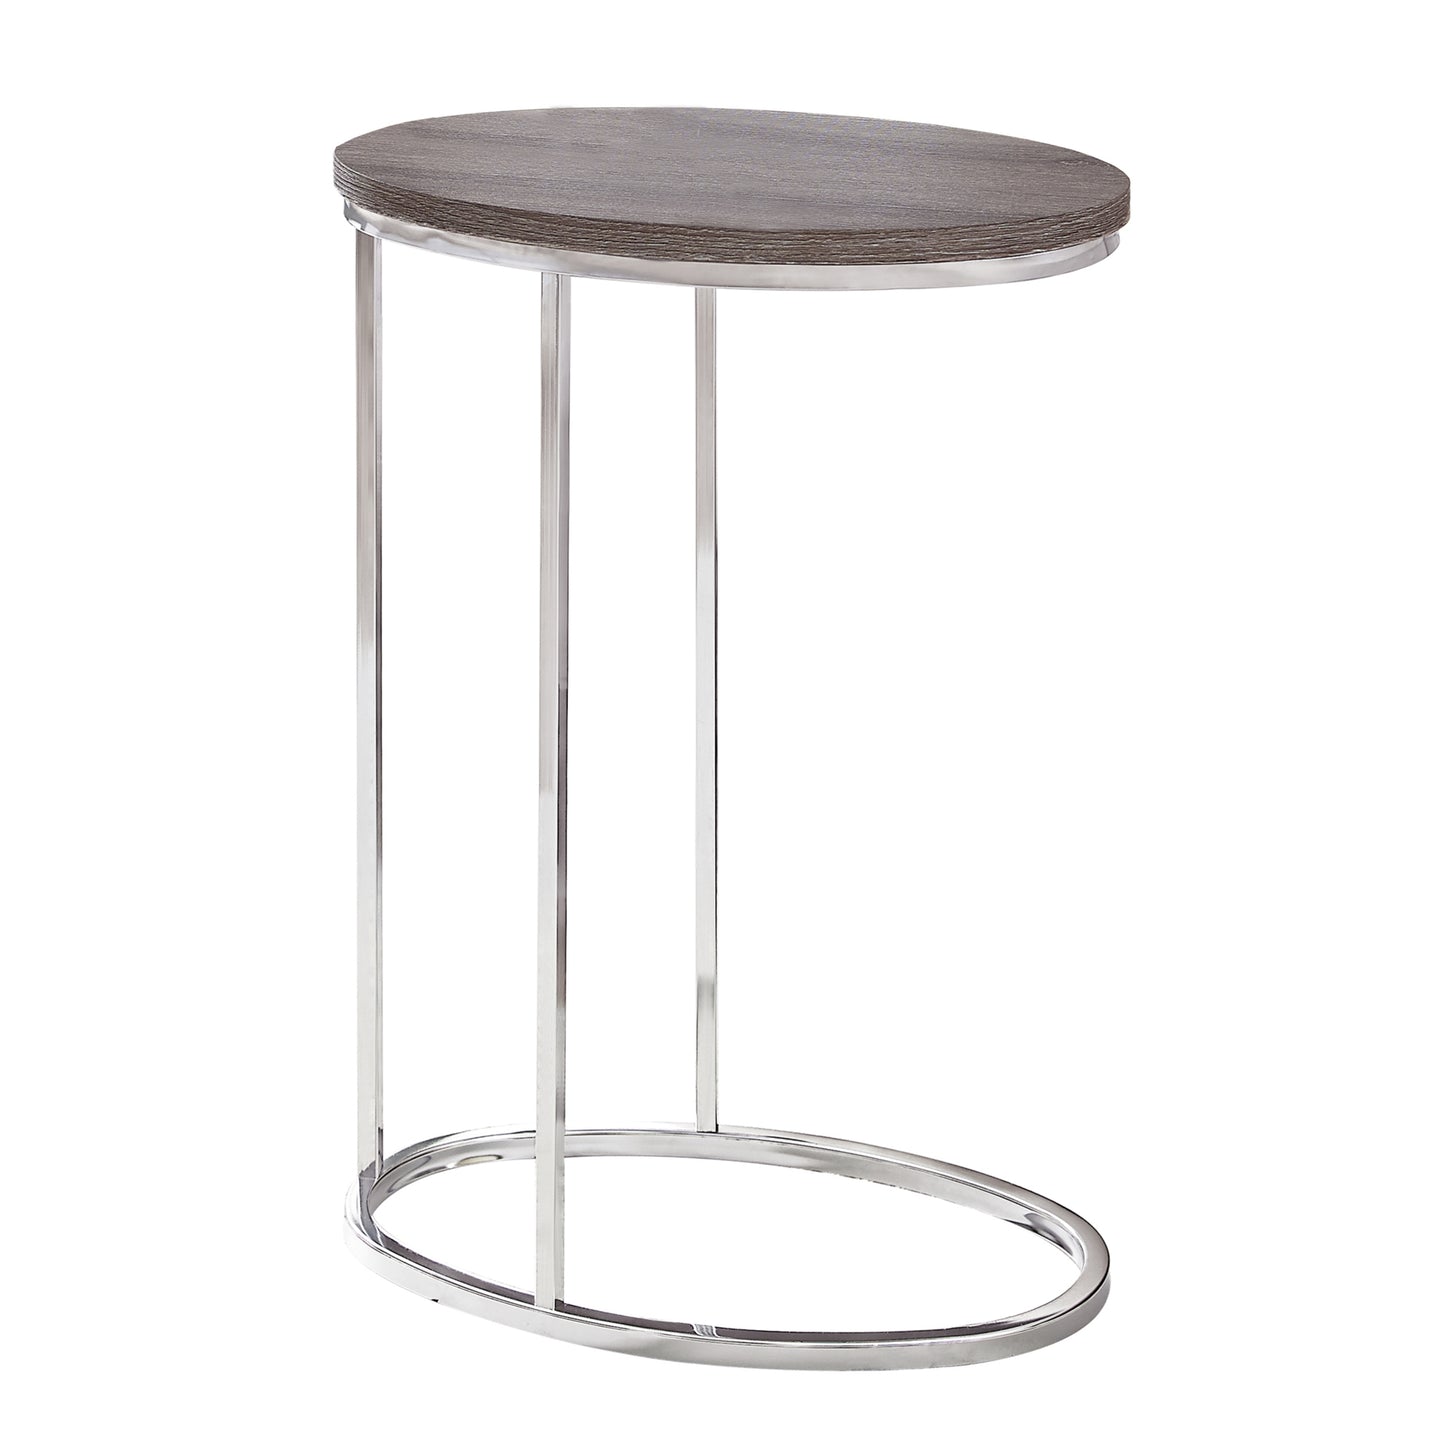 18.5" x 12" x 25" Dark Taupe Particle Board Laminate Metal Accent Table